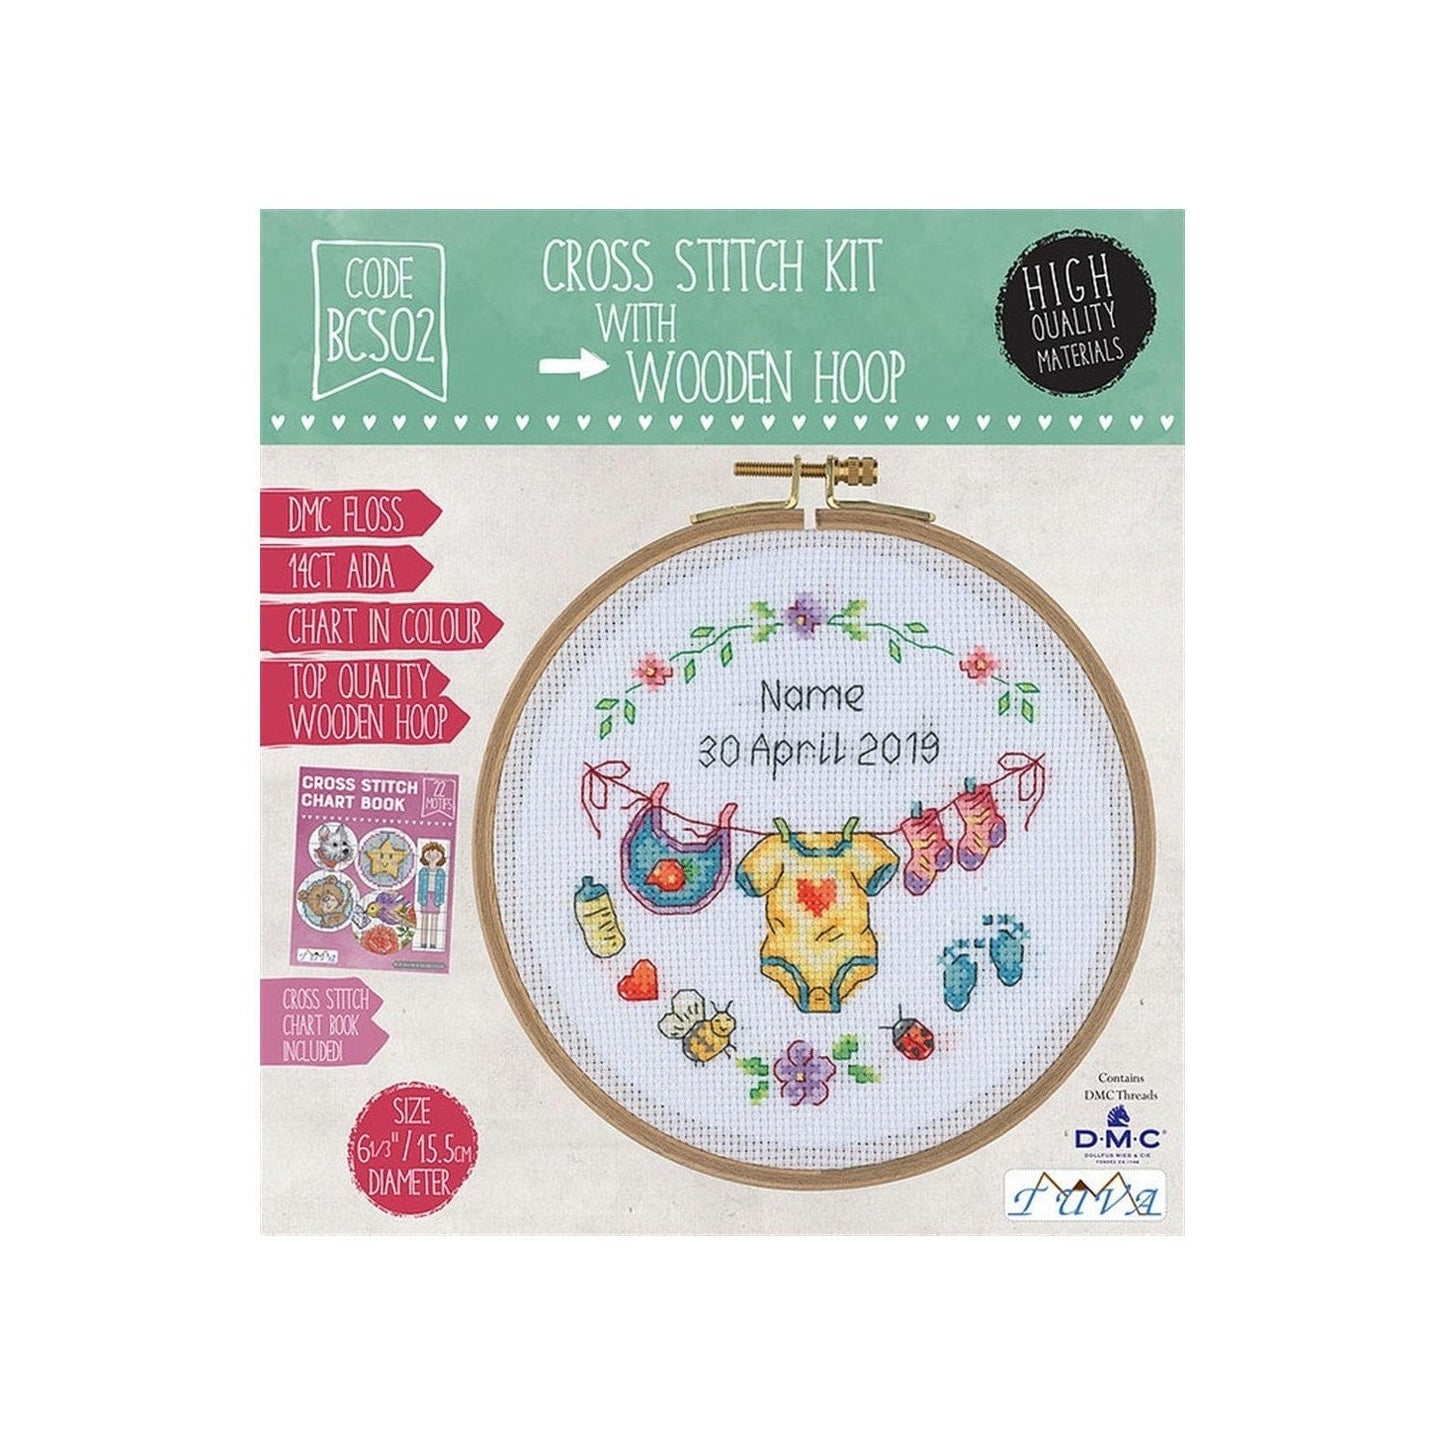 Baby Clothesline Counted Cross Stitch Kit with DMC Floss and Wooden Hoop by Tuva